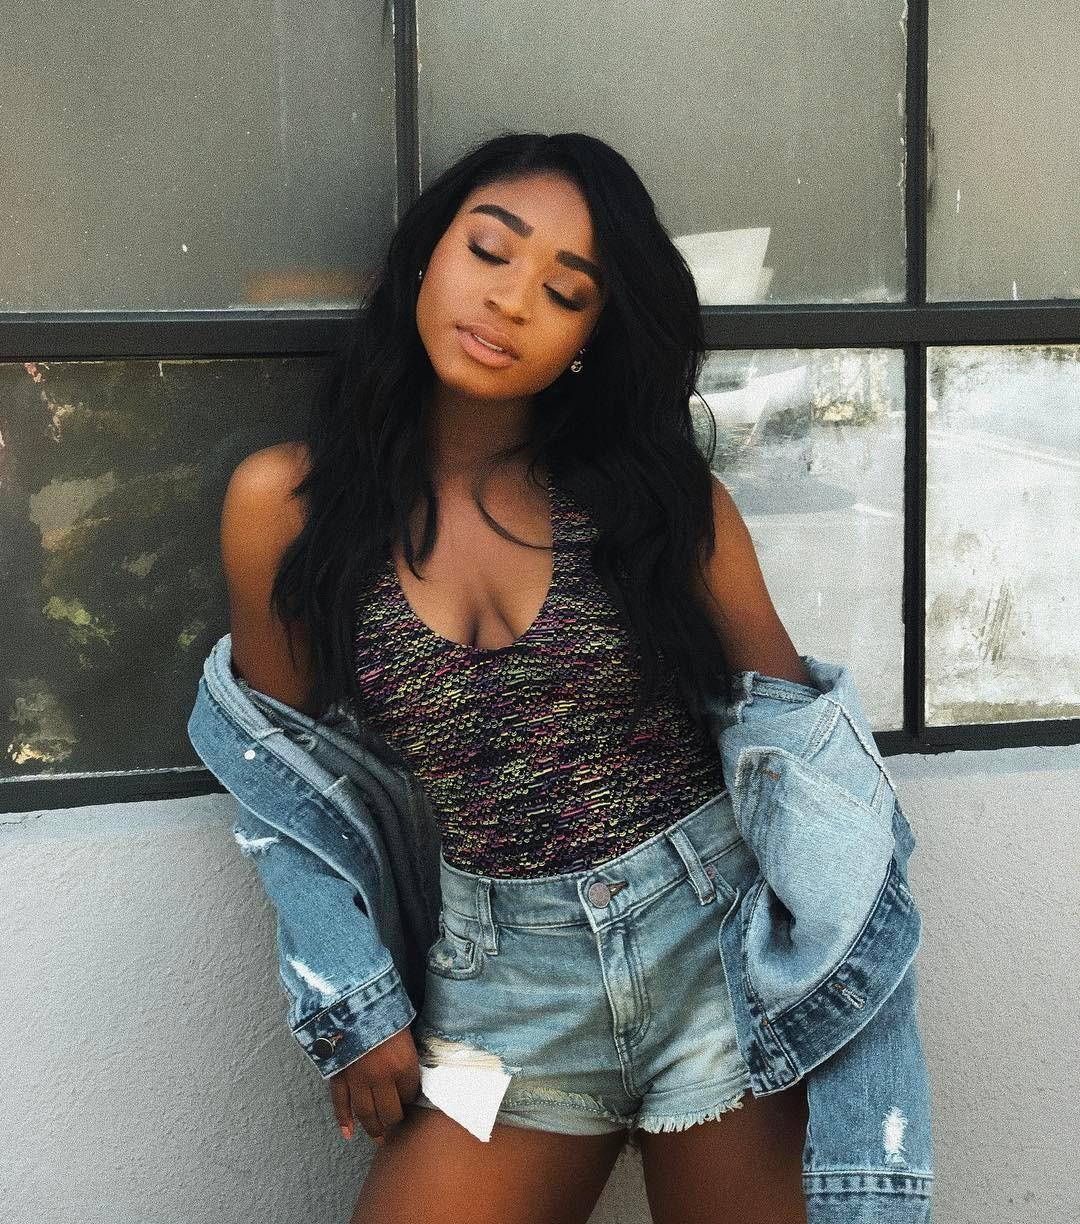 Normani. Fitness Models Biography